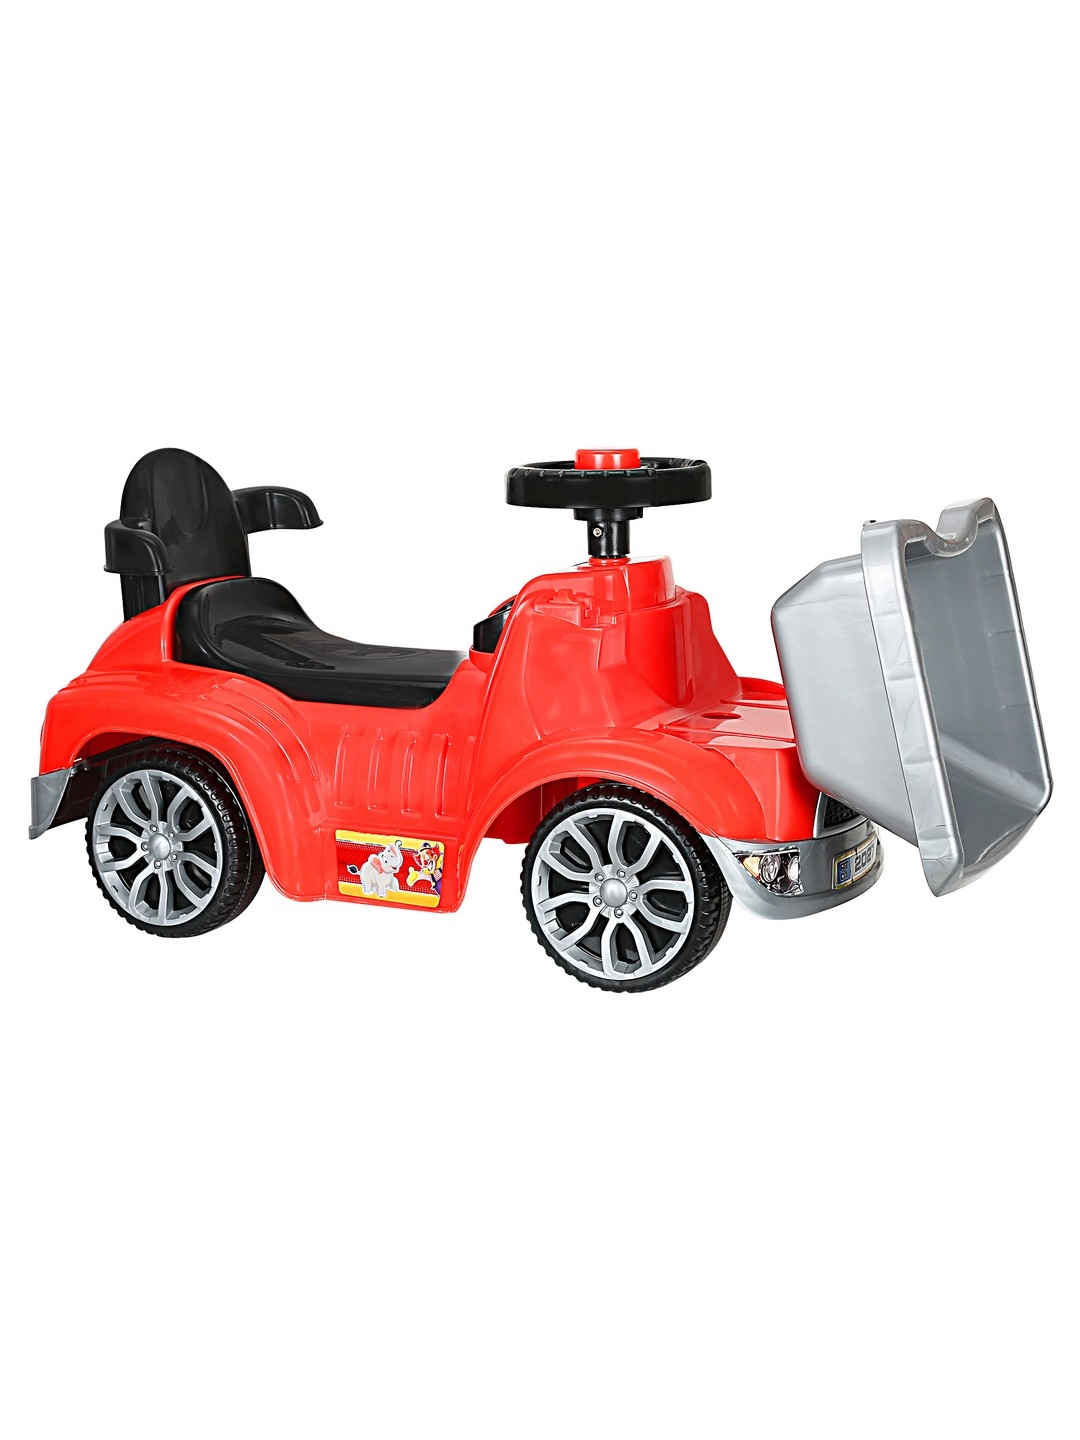 CREATURE | Creature Red Ooga Rider Ride-On Cars Toy Vehicle for Kids